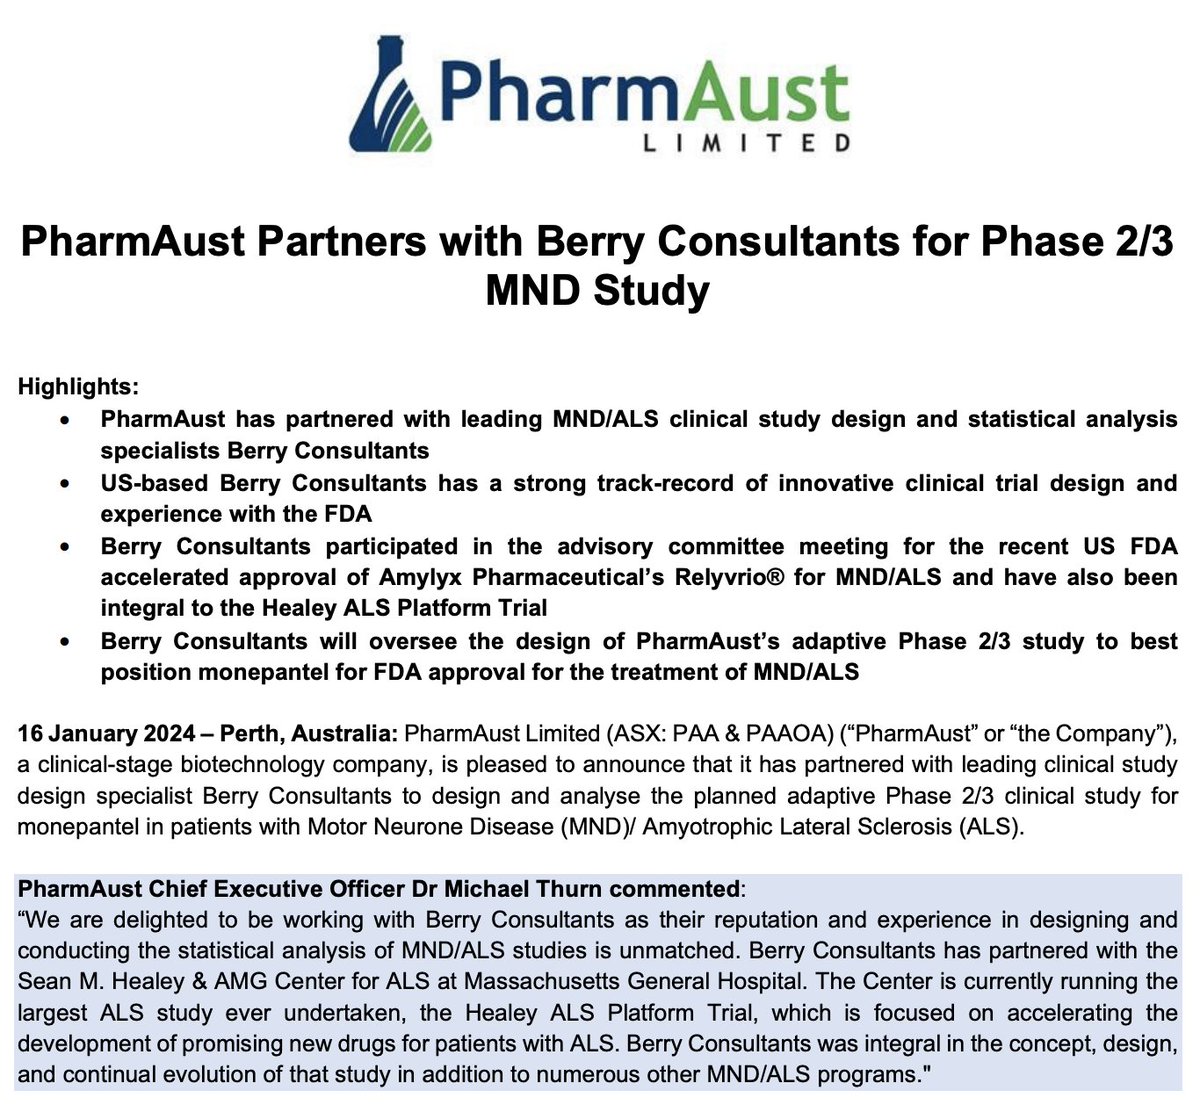 $PAA has partnered with leading #MND/#ALS clinical study design & statistical analysis specialists Berry Consultants, who will oversee the design of our adaptive Phase 2/3 study to best position monepantel for FDA approval for the treatment of MND/ALS: tinyurl.com/3td89s4r